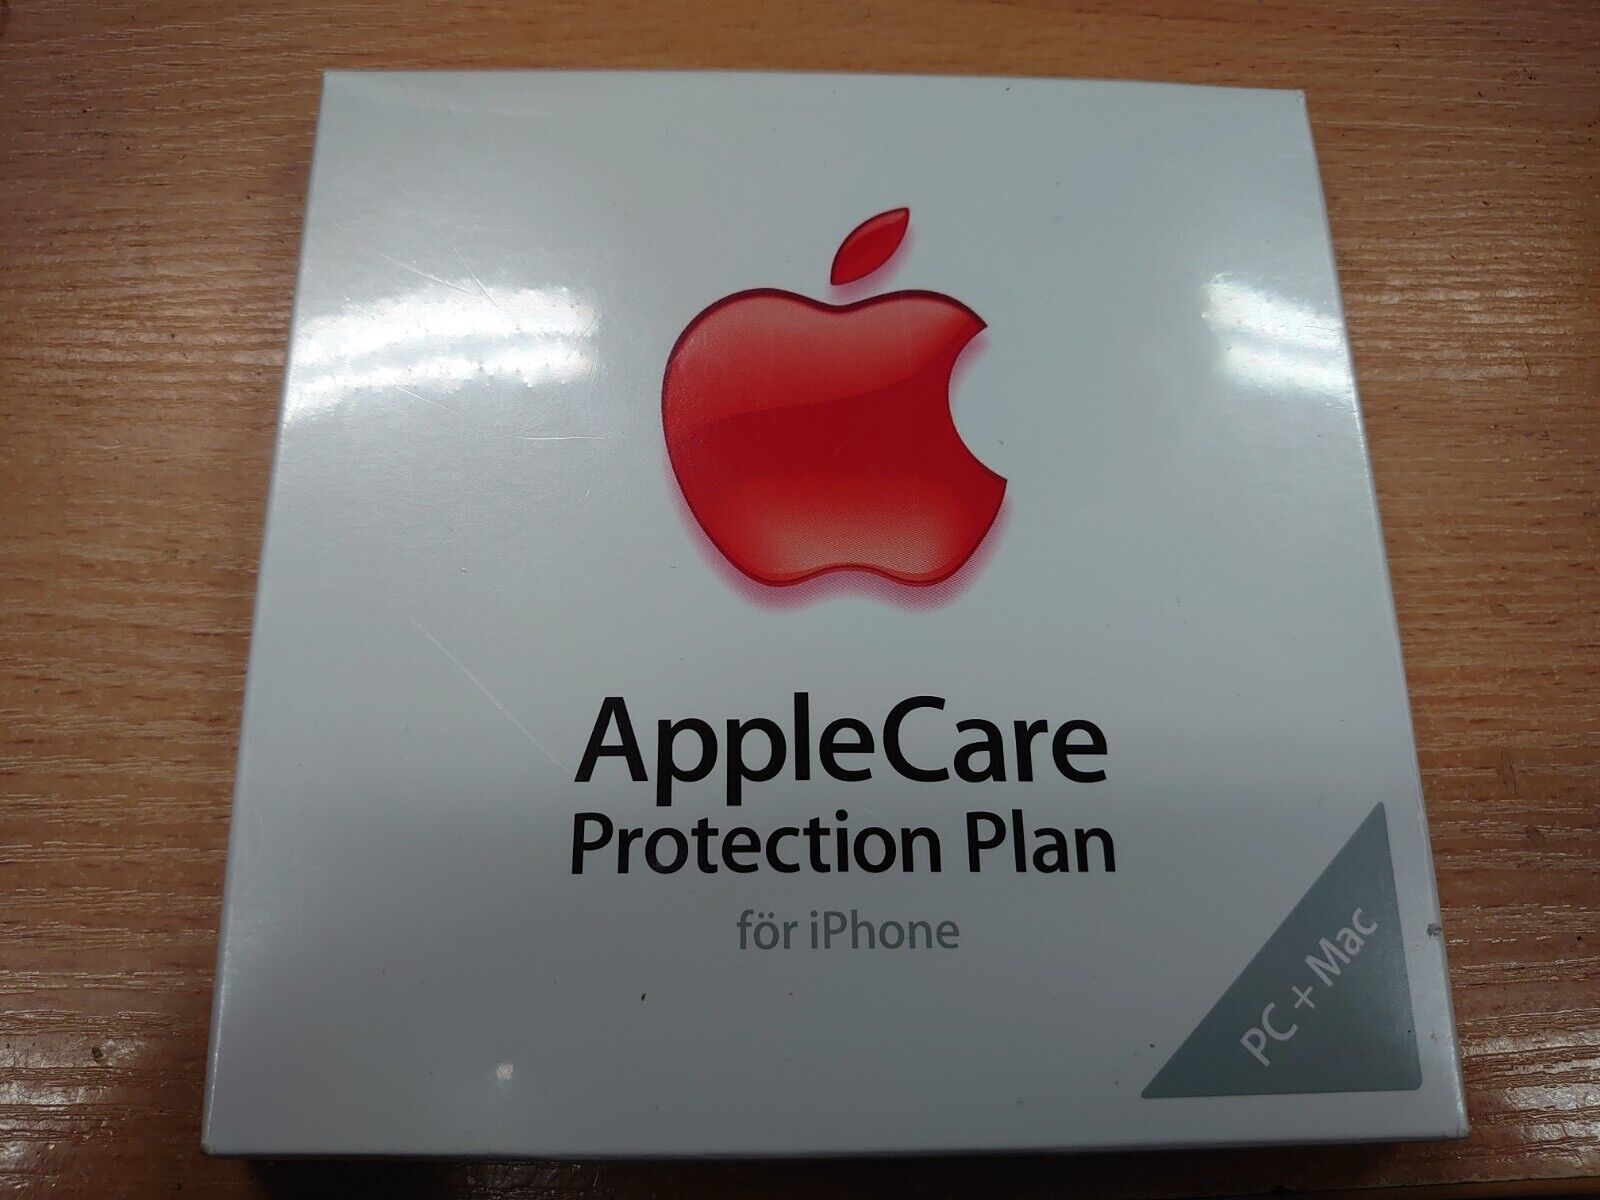 AppleCare Protection Plan for Iphone - new in plastic